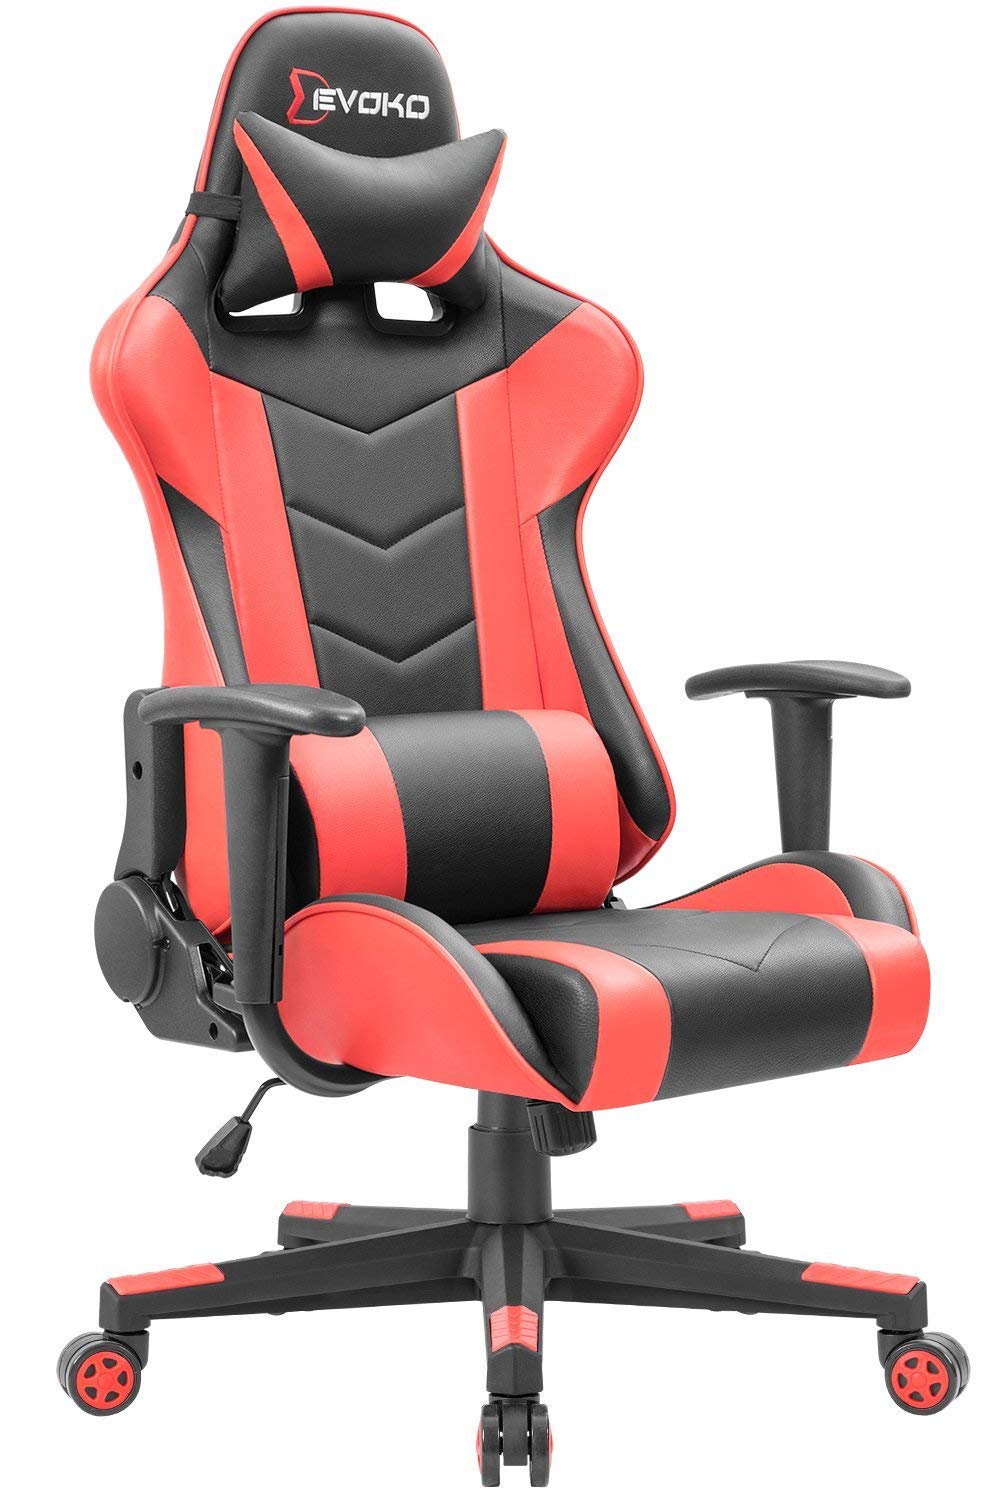 Costume Best Pc Gaming Chairs On Amazon with Dual Monitor